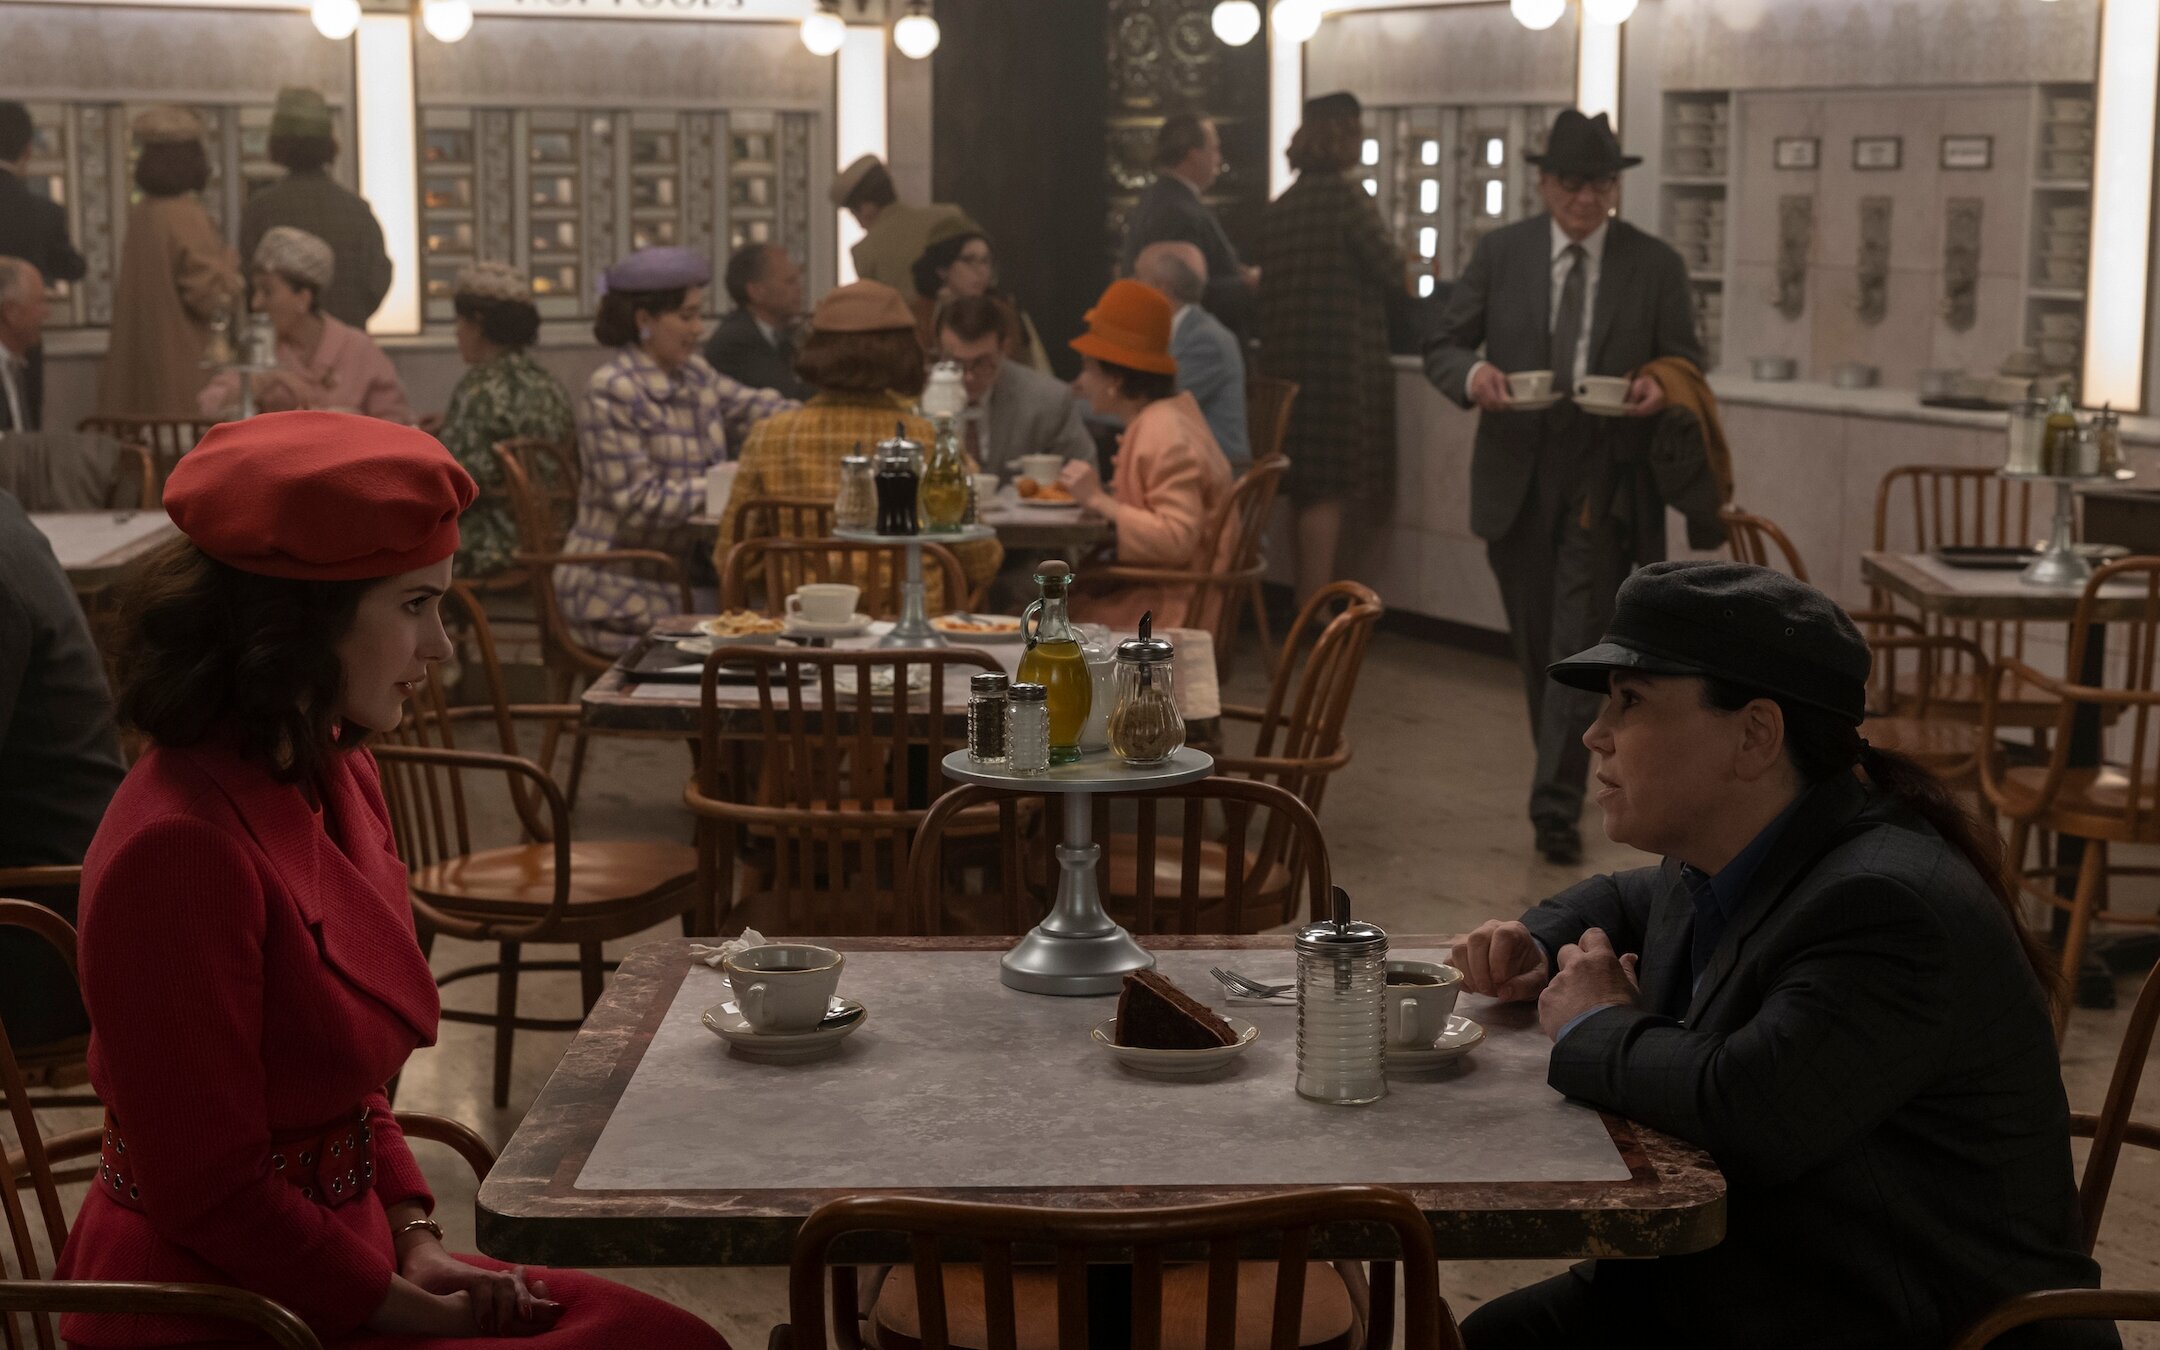 Rachel Brosnahan and Alex Borstein in a scene from the fifth season of “The Marvelous Mrs. Maisel.” (Philippe Antonello/Prime Video)